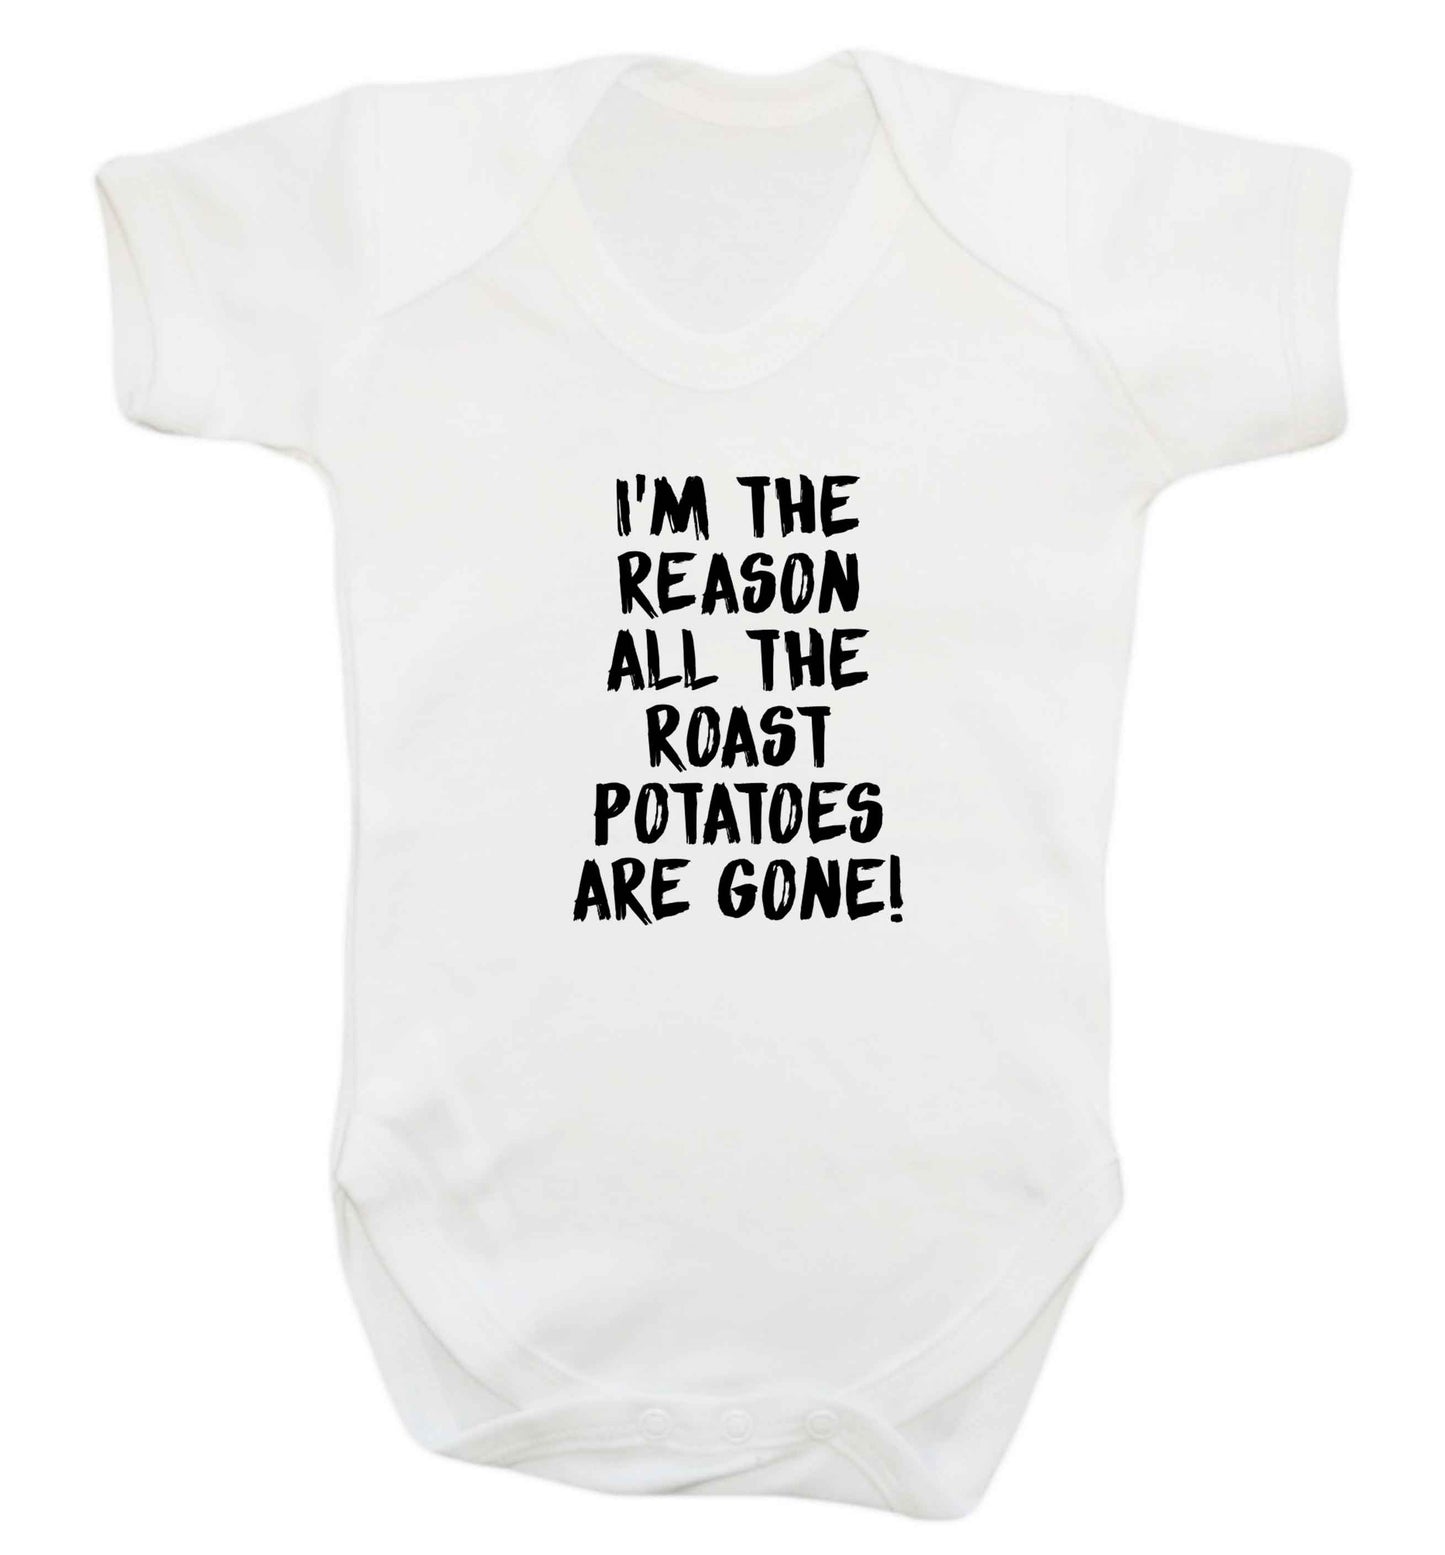 I'm the reason all the roast potatoes are gone baby vest white 18-24 months